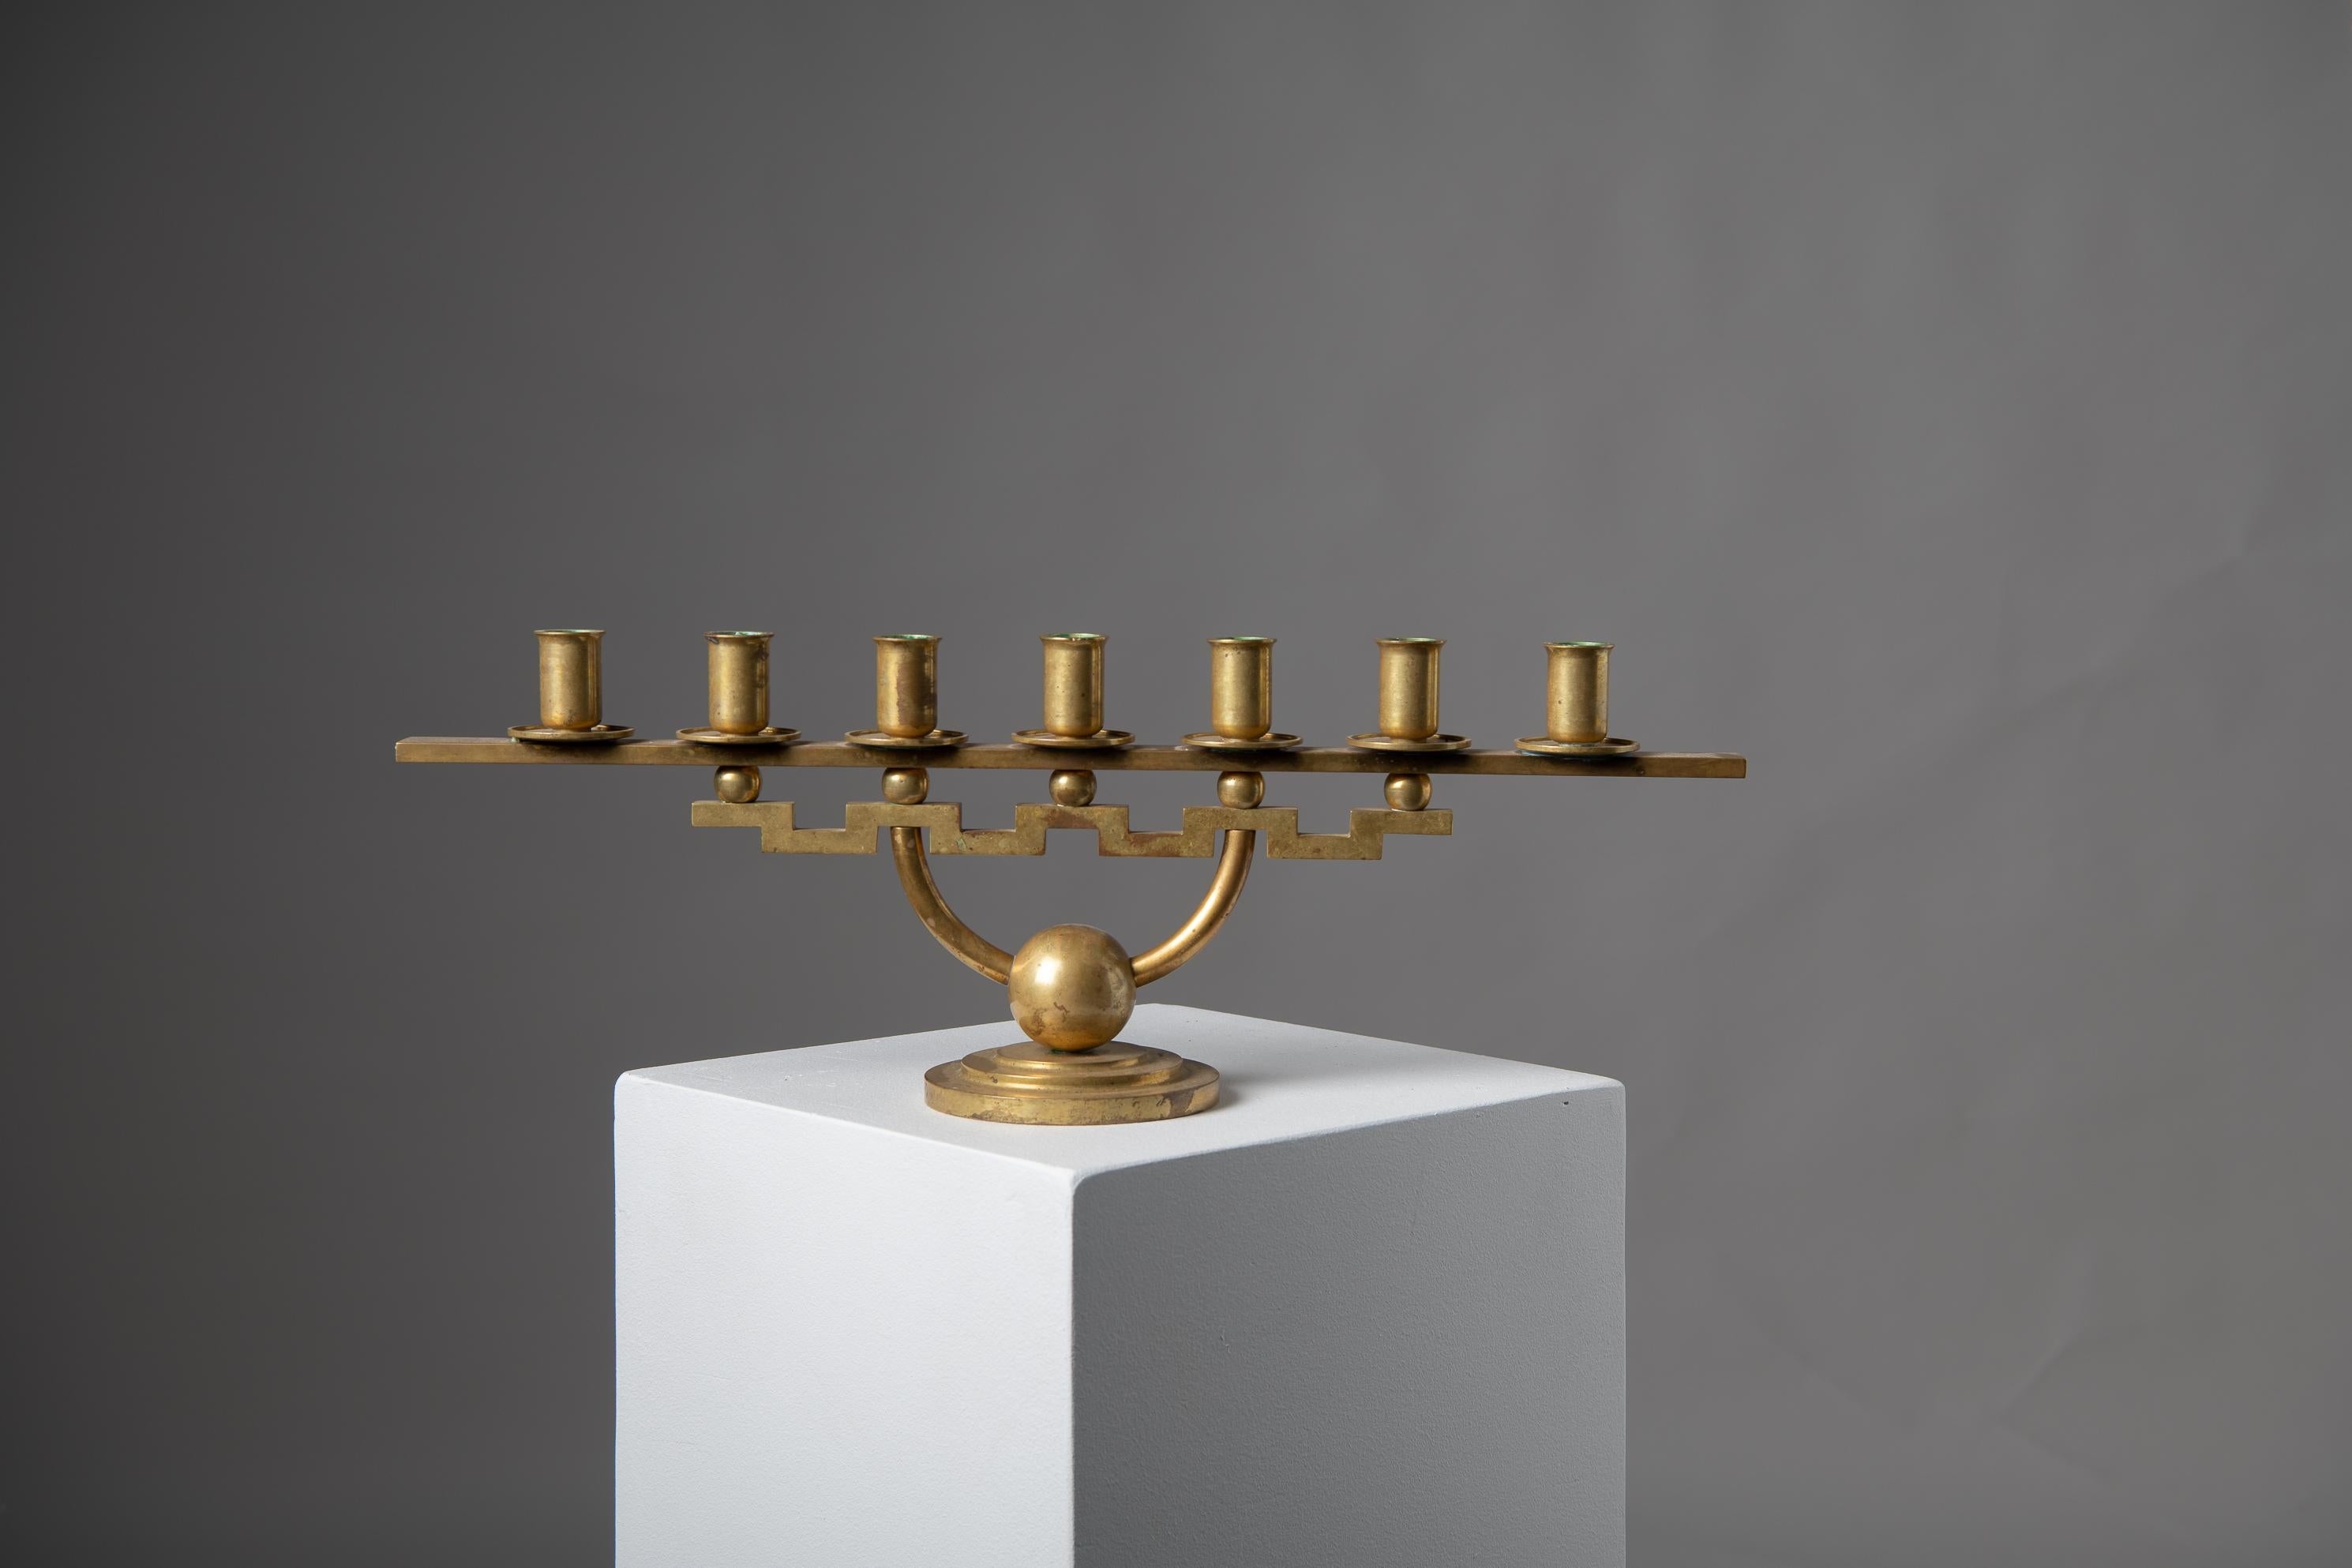 Scandinavian modern candlestick holder by Lars Holmström, Arvika Sweden. The candlestick holder has seven arms and boasts a geometric but simplistic design. It is made in brass and has the authentic patina of time. A candlestick holder is a simple